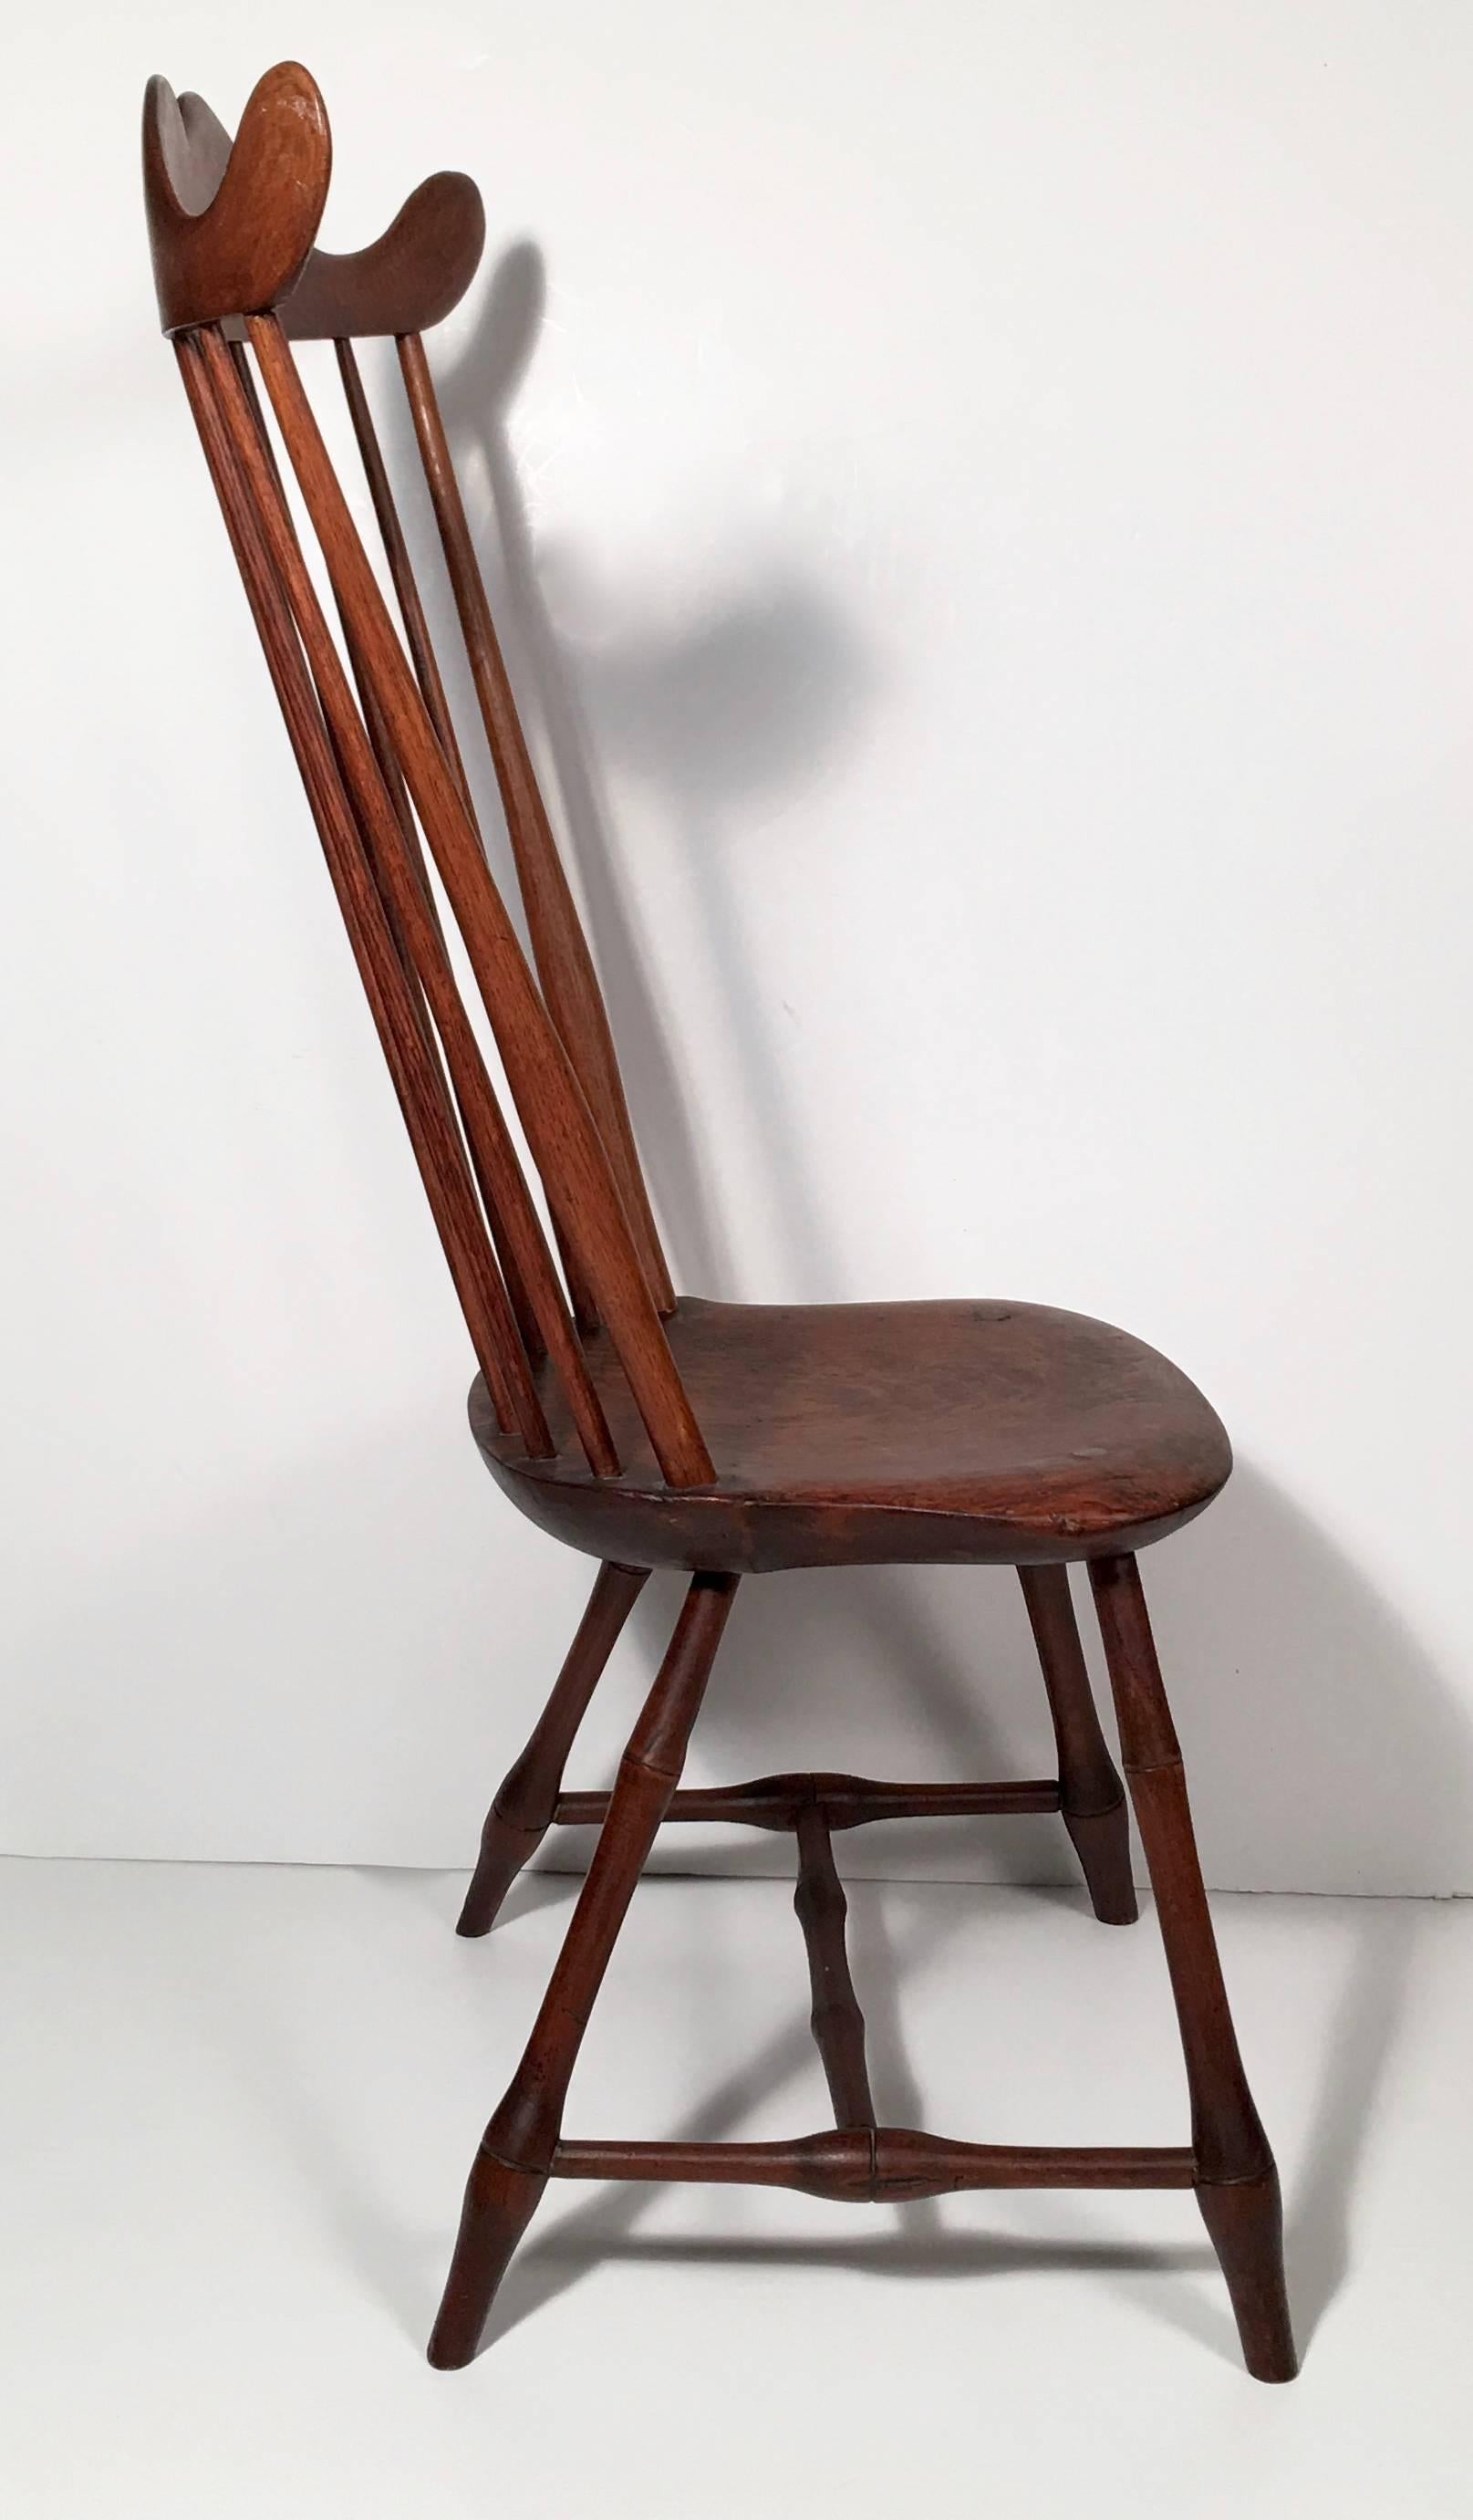 Carved Uncommon New Hampshire Windsor Chair